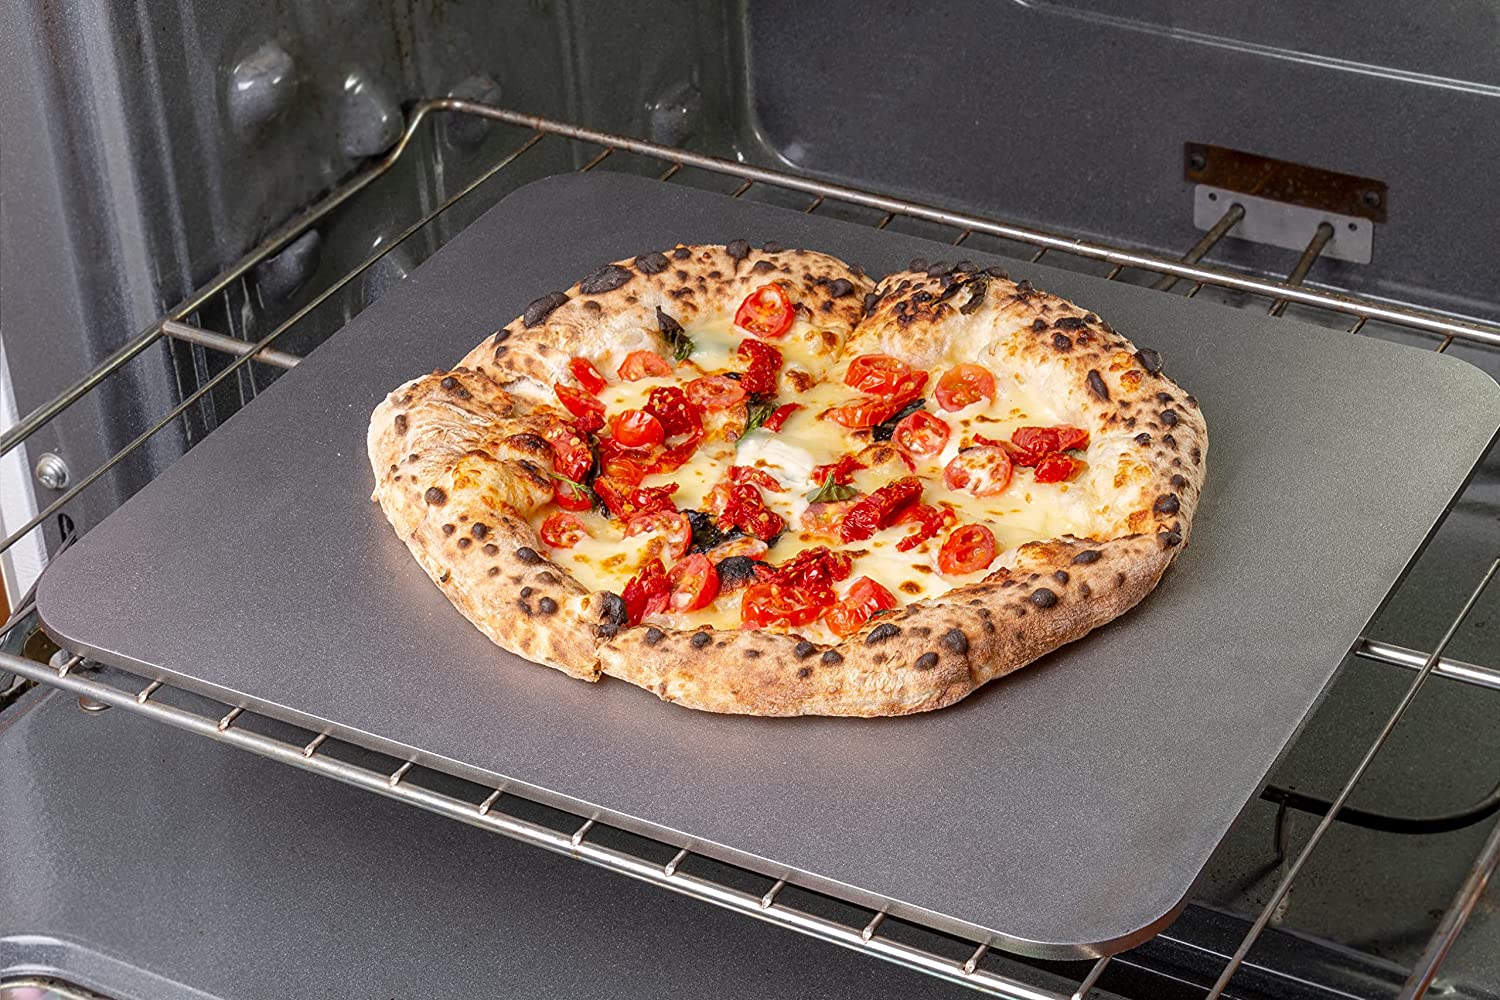 14x16x1/4"(0.25) - No Thumb Holes-Baking oven steel & Pizza steel -Pizza Stone- No Holes same great steel!